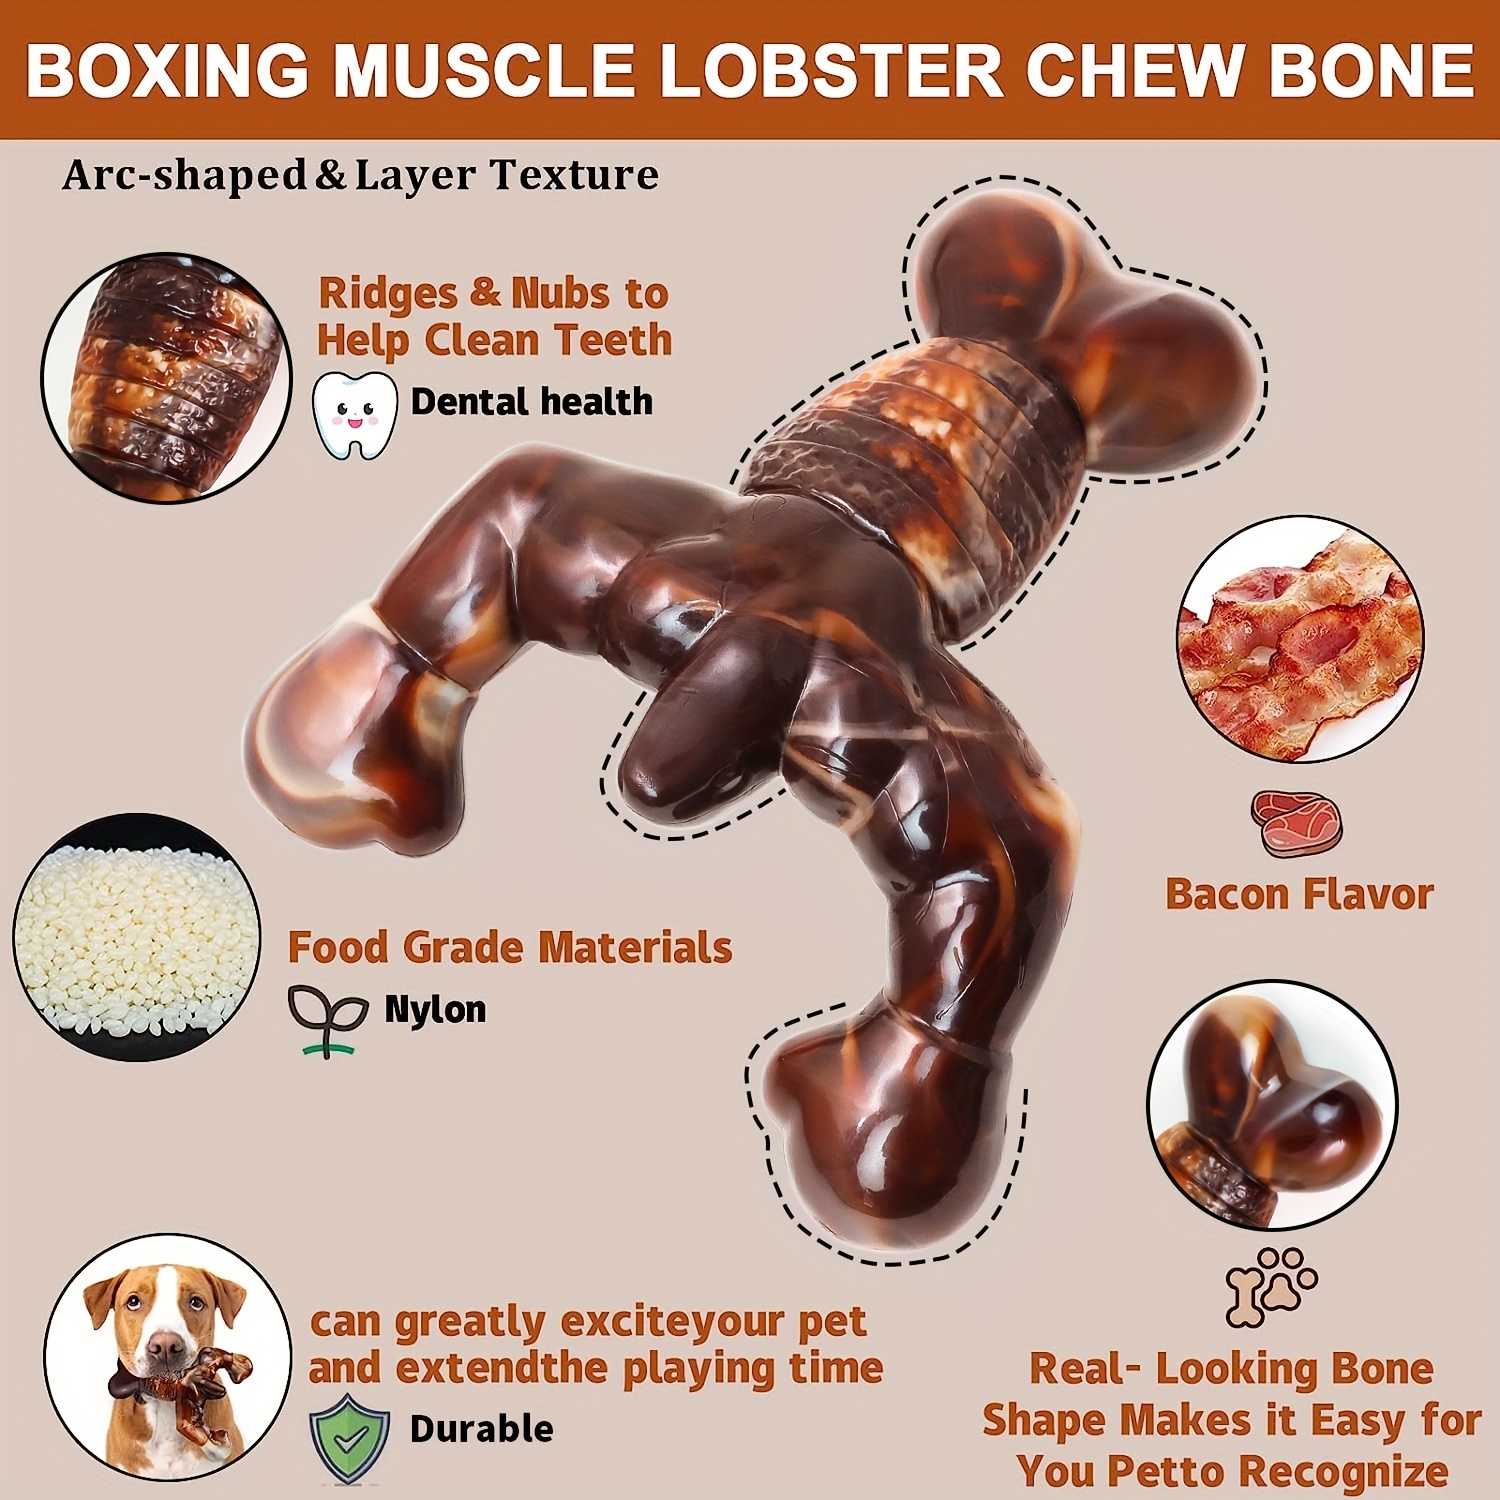  Dog Chew Toys for Aggressive Chewers - Indestructible Dog Toys,  Real Bacon Flavored, Tough Dog Bone Chew Toy for Medium/Large Breed Dogs,  Best Extreme Chew Toys to Keep Them Busy (Brown) 